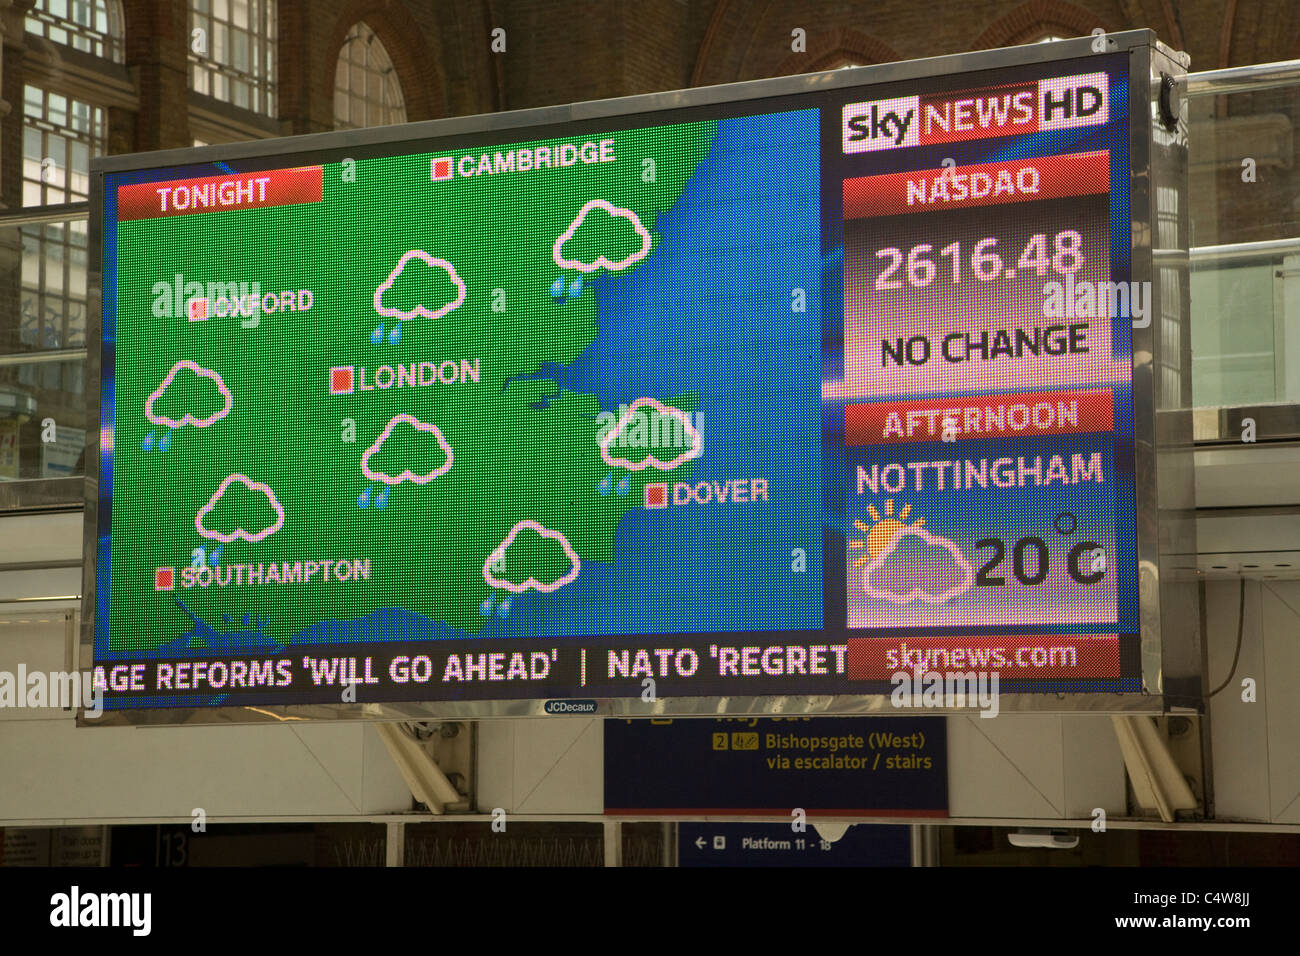 Electronic display of weather information and news headlines, Liverpool Street station, London Stock Photo